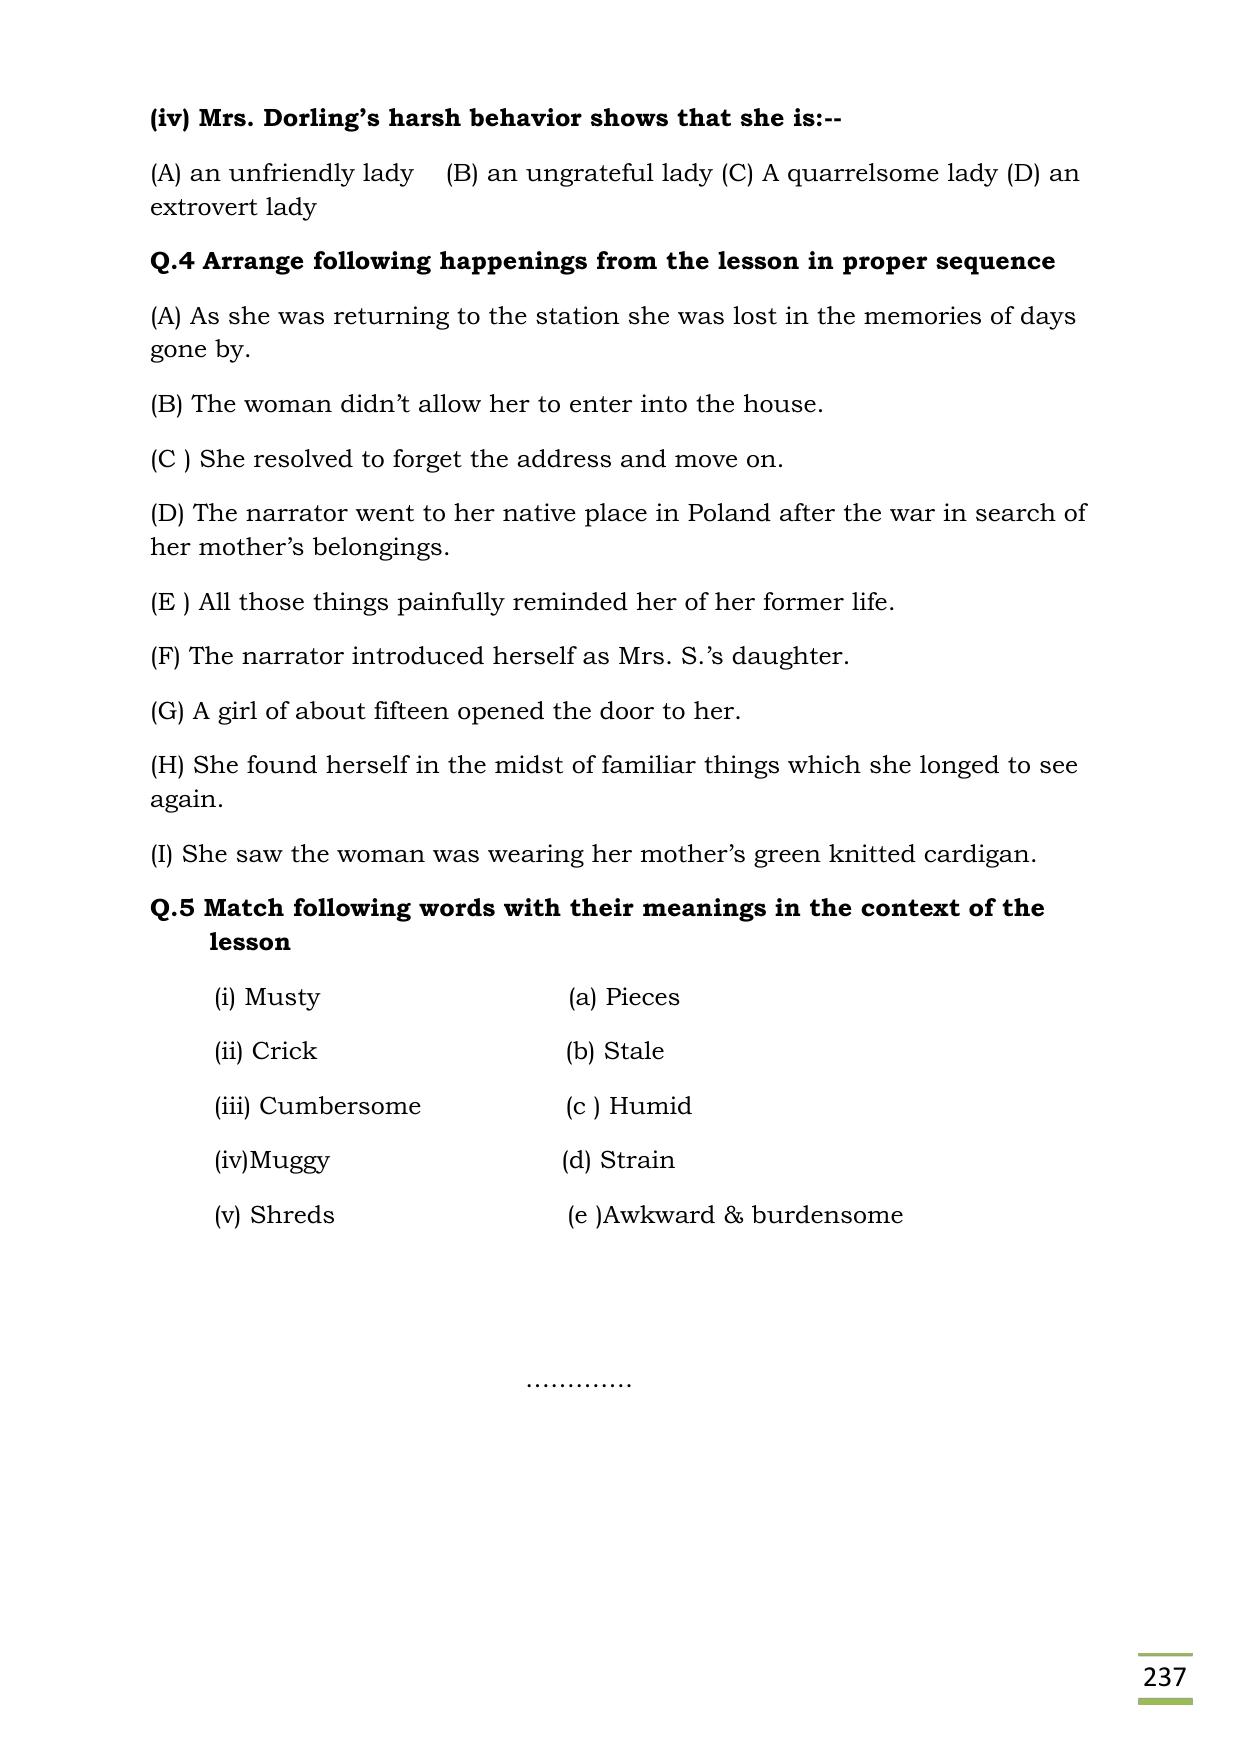 CBSE Worksheets for Class 11 English The Address questions answers - Page 2